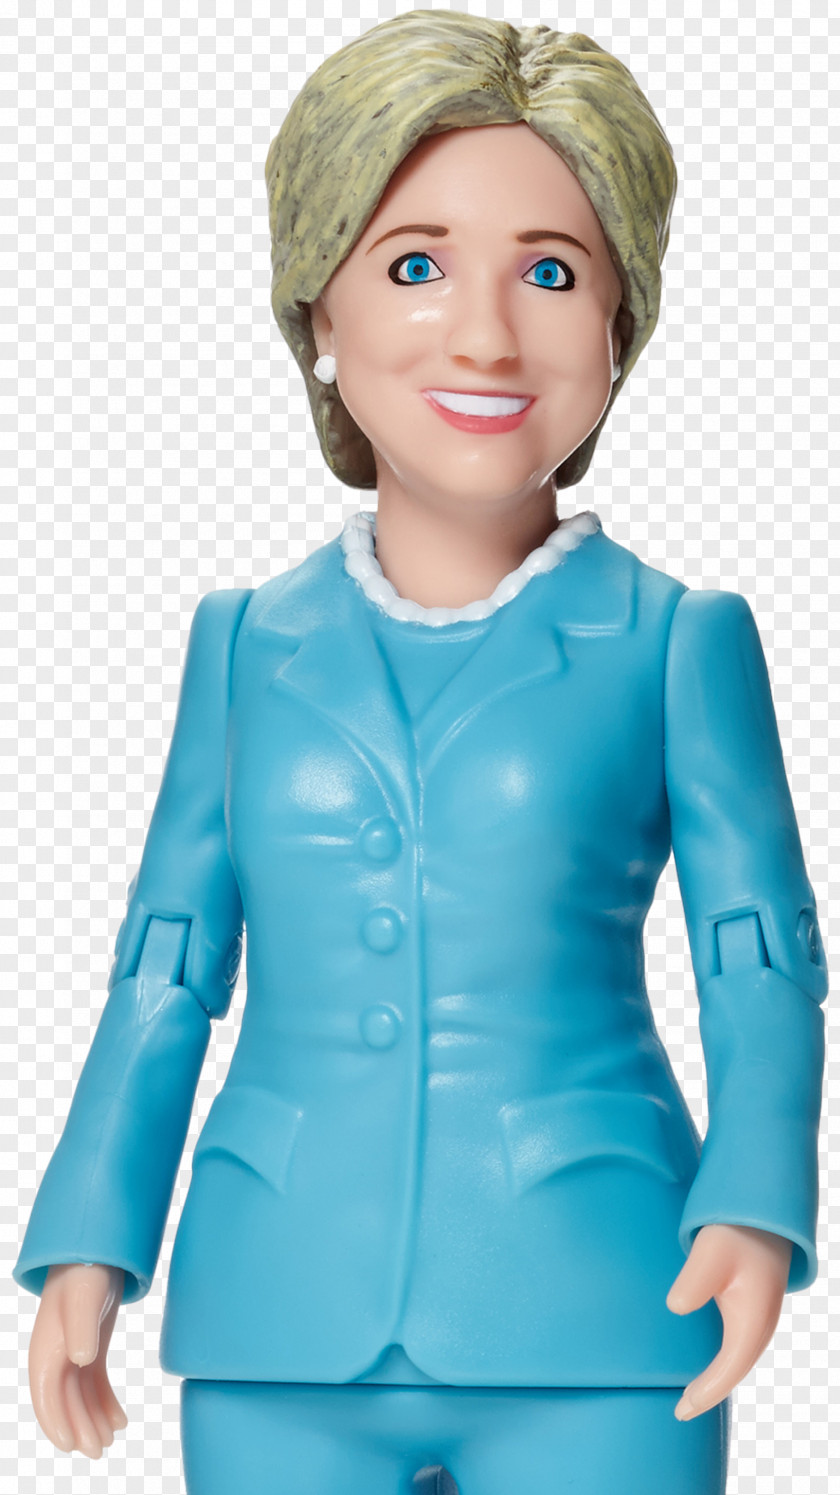 Hillary Clinton White House US Presidential Election 2016 Action & Toy Figures Pant Suits PNG